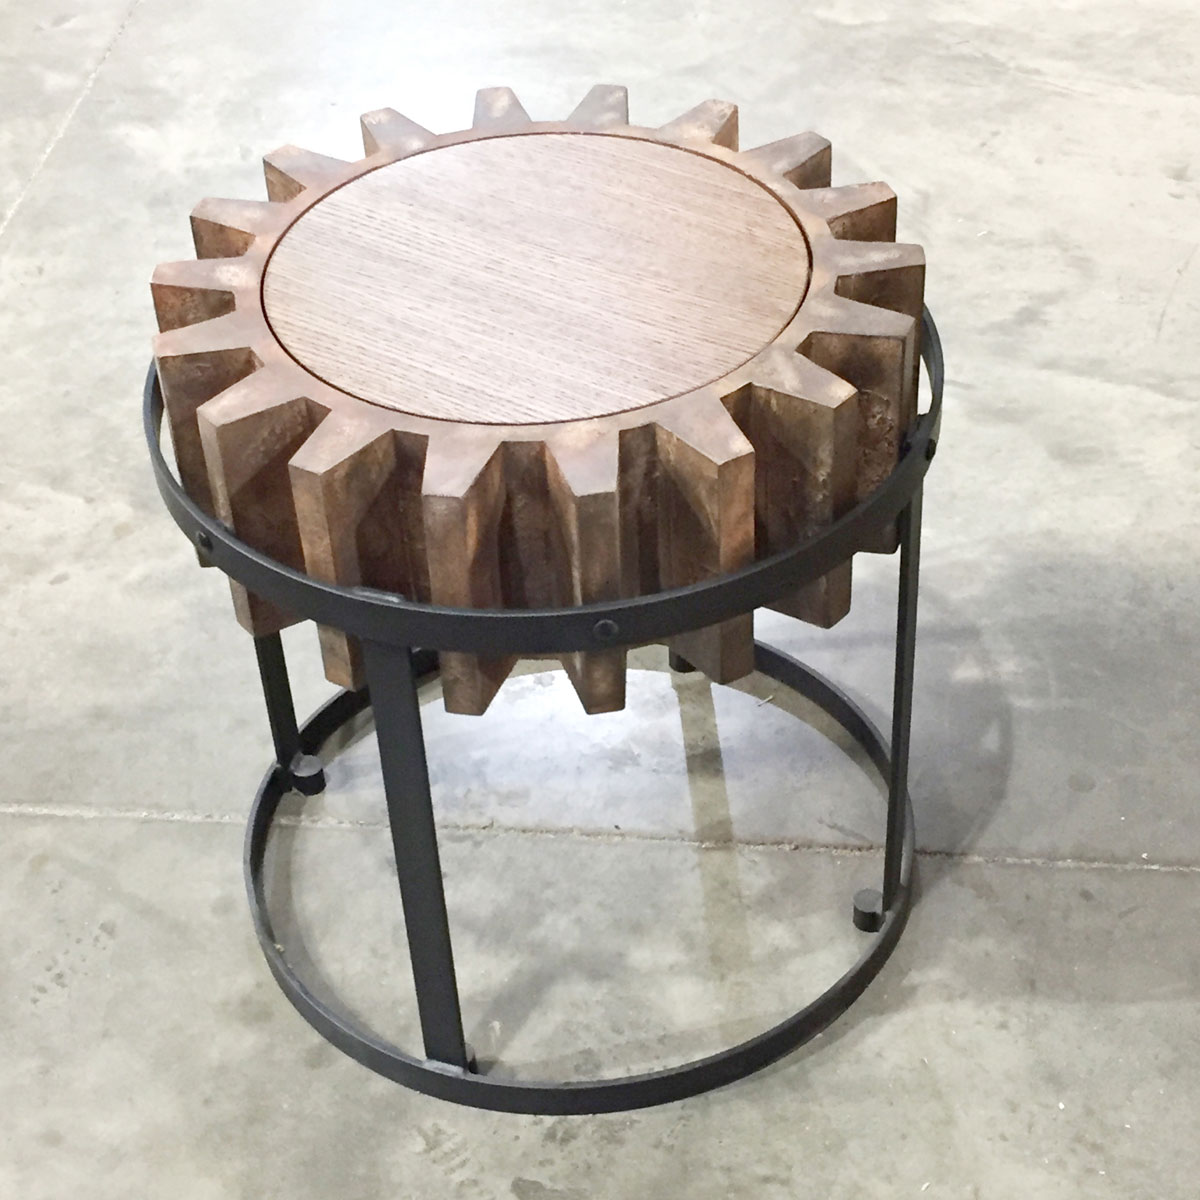 Hospitality furniture - Gear Cog Table